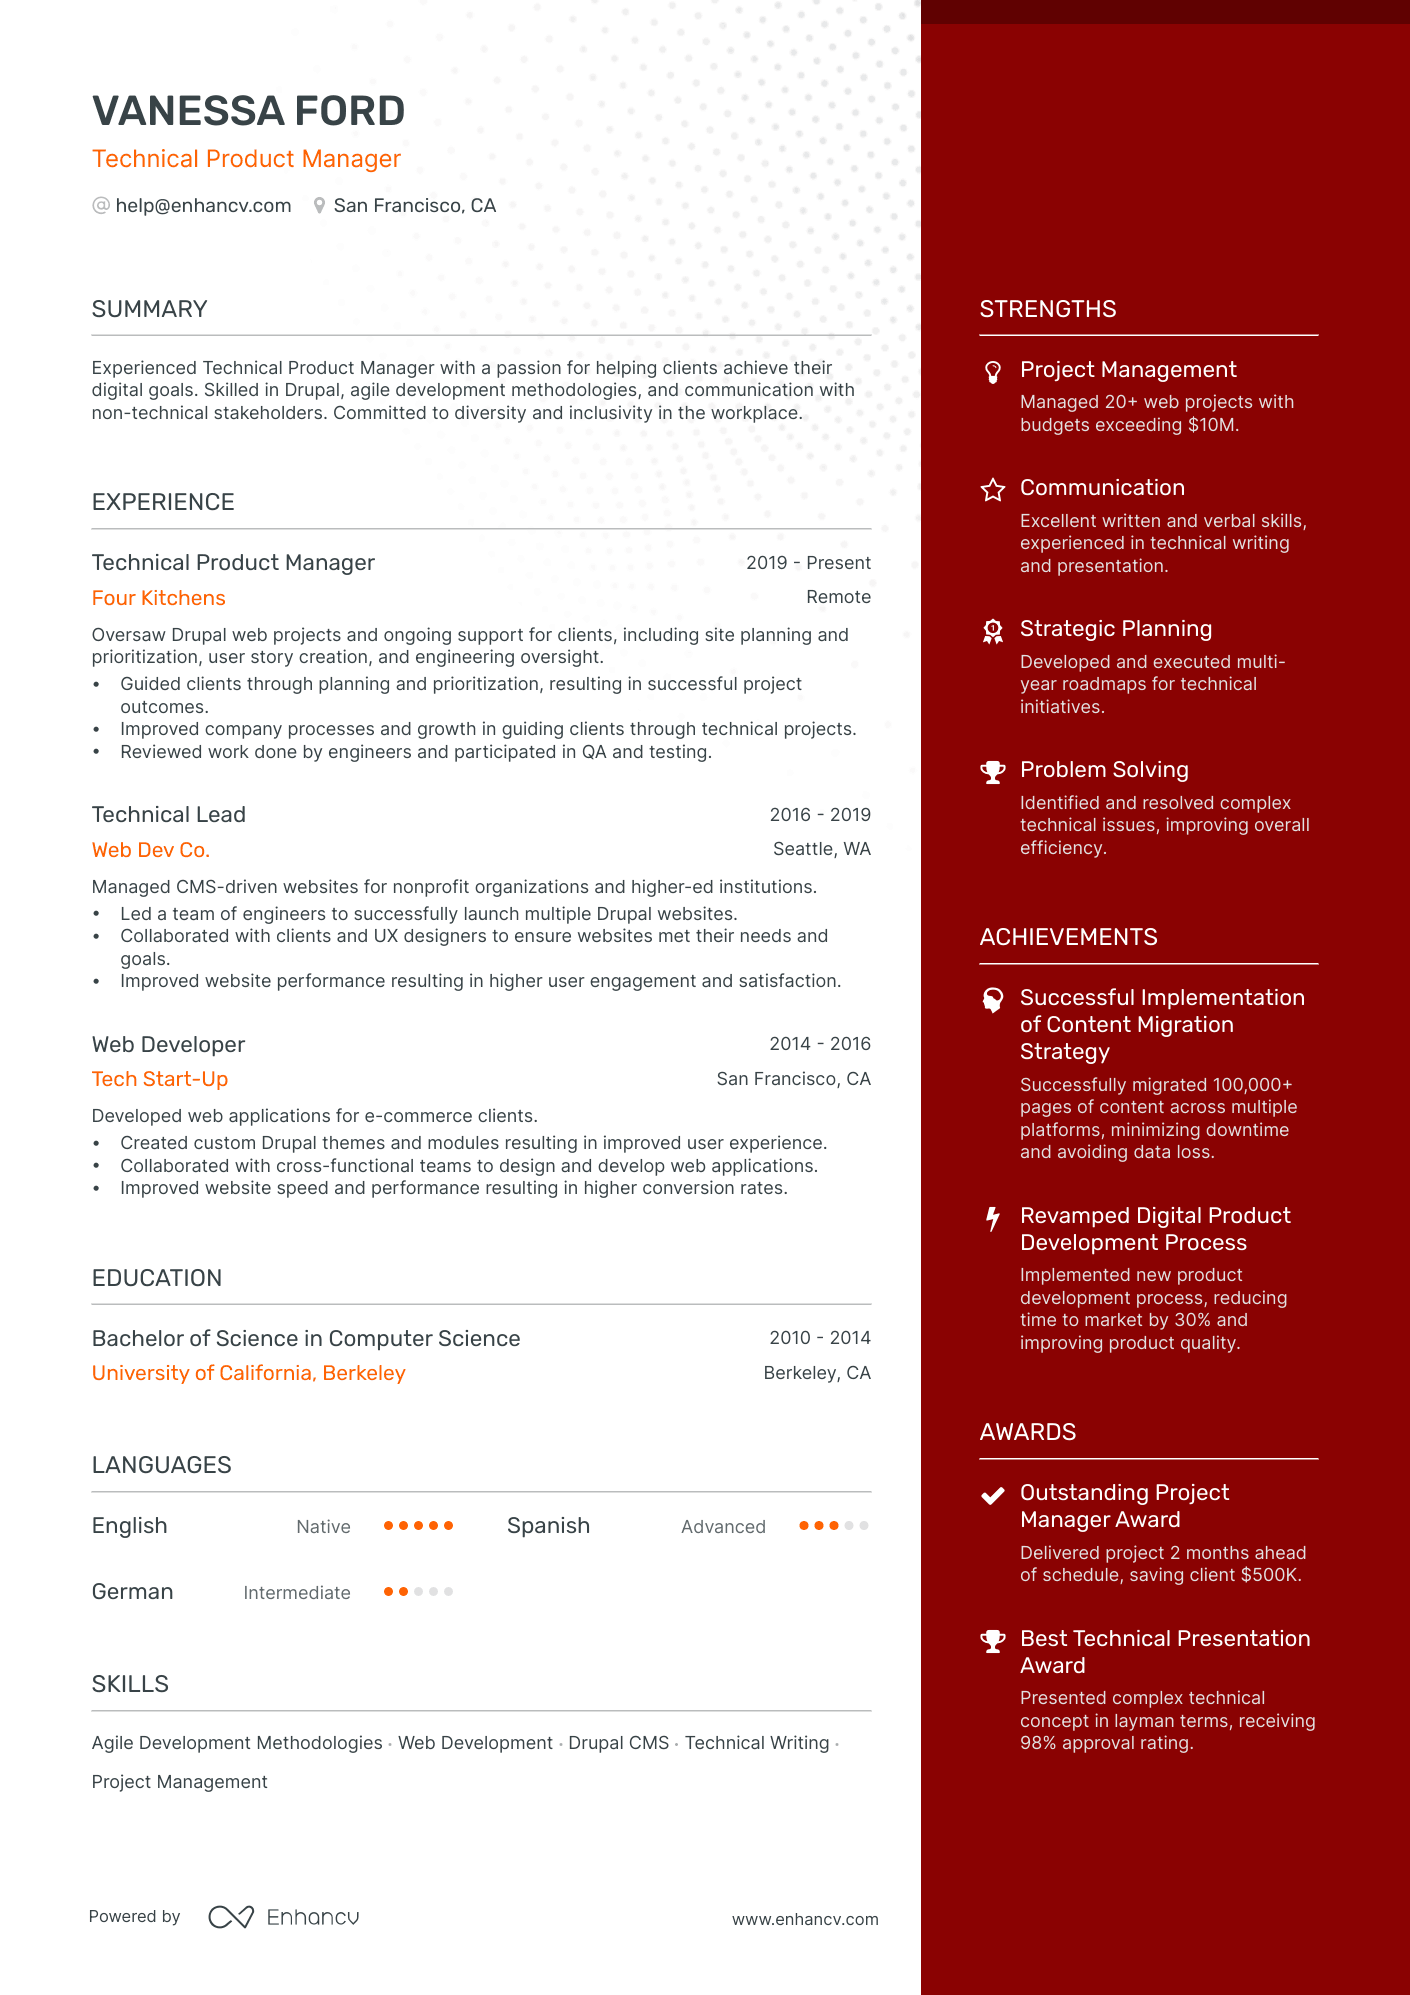 Technical Project Manager resume example